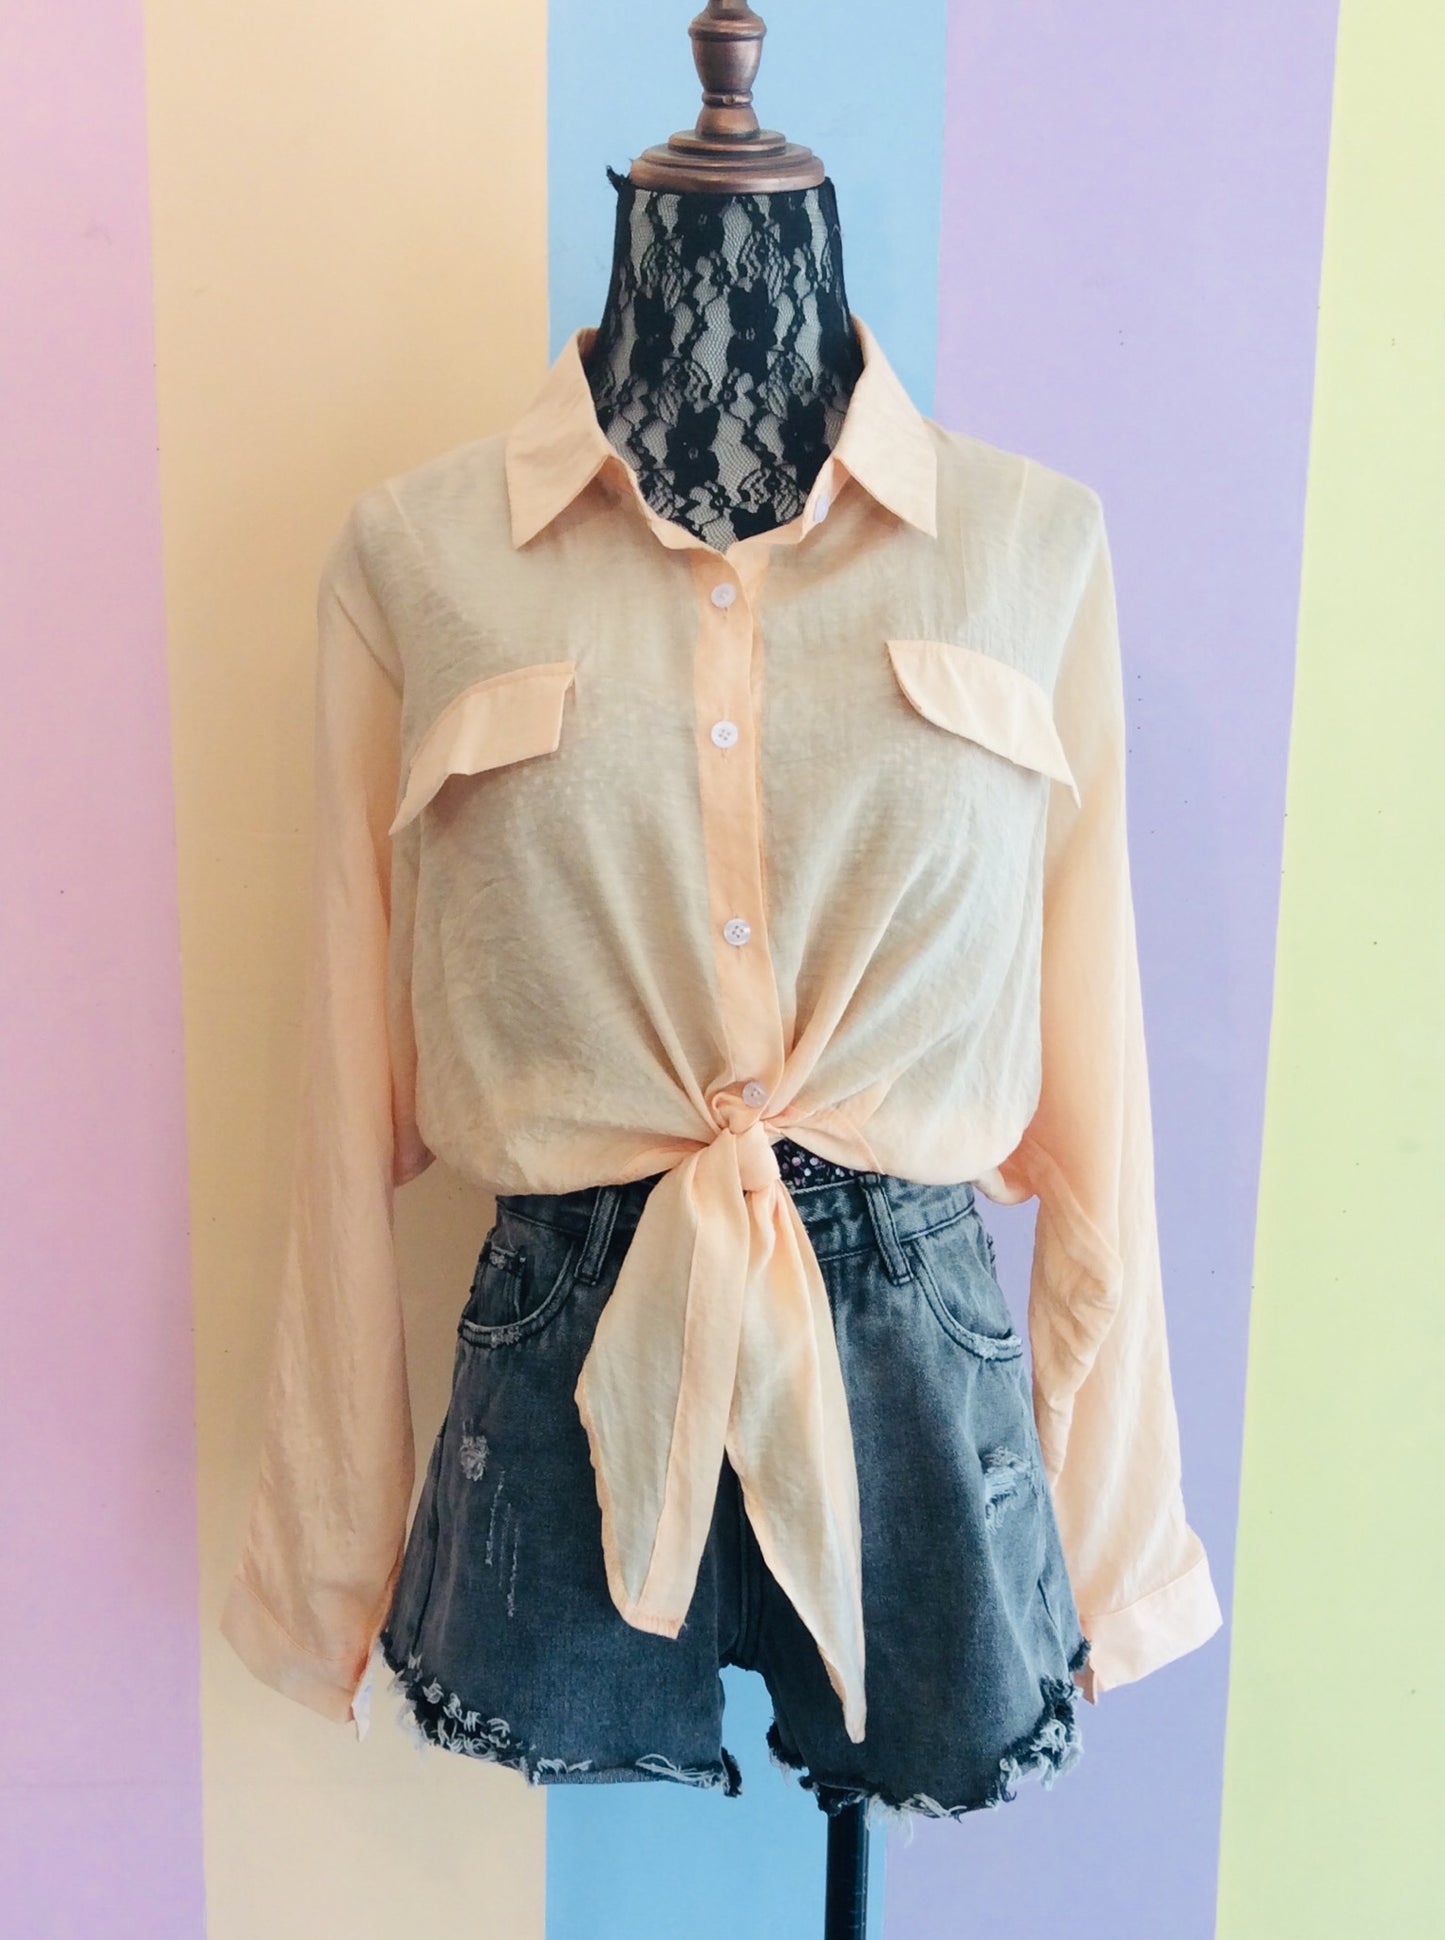 Classic Plain Button Down Full Sleeve Top w/ Belly Bow